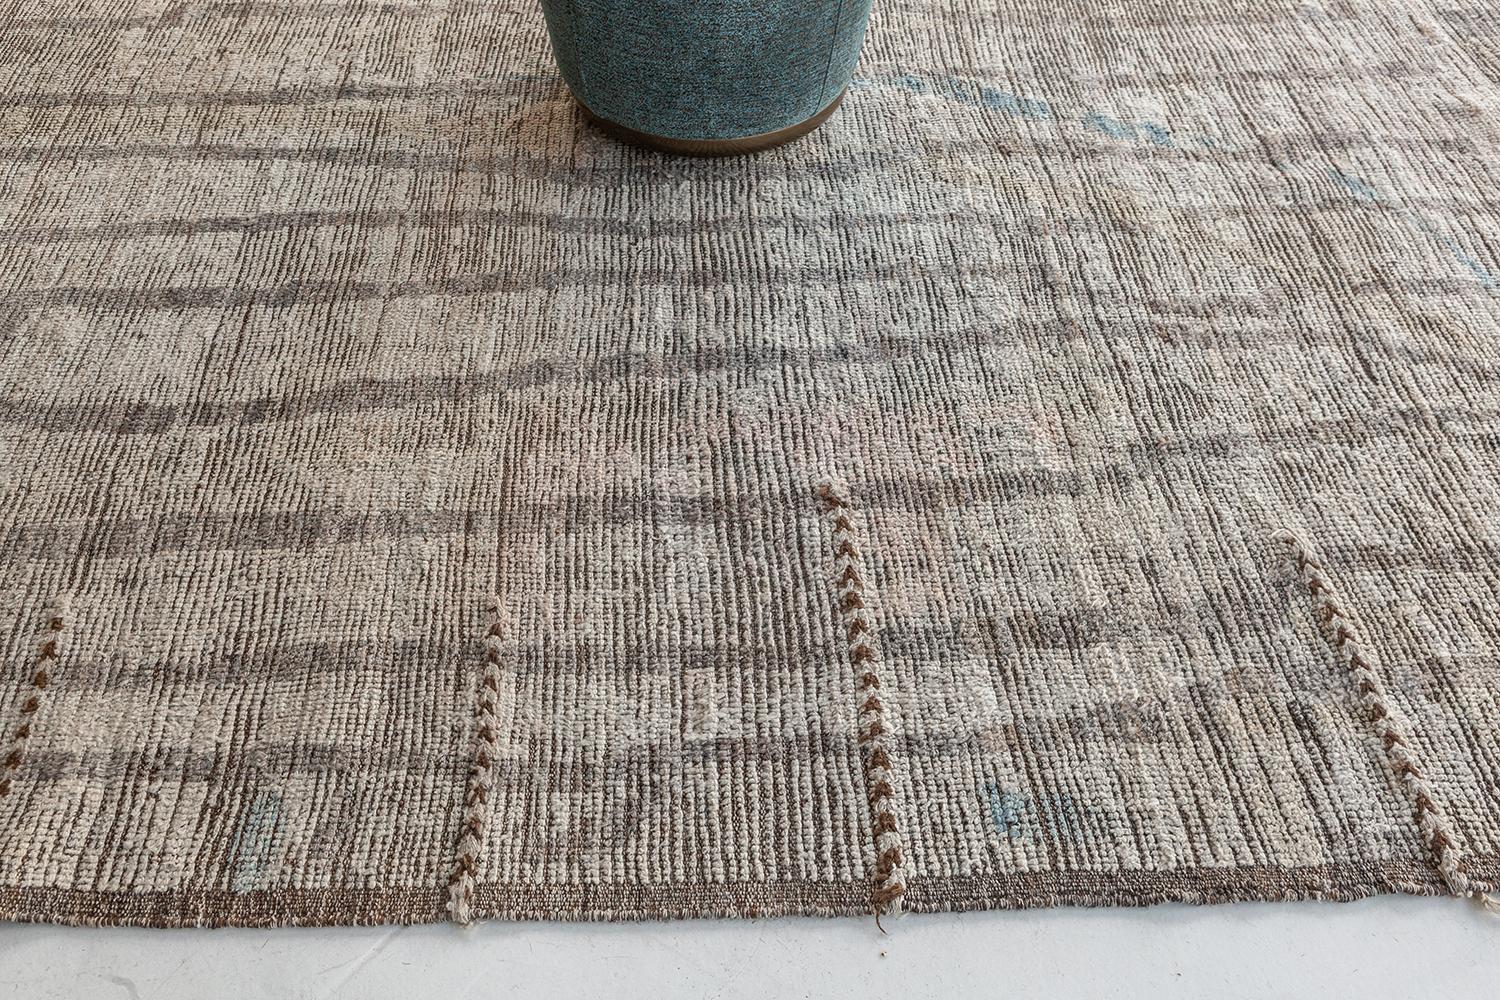 'Berberis' is an interplay between natural earth tones and soothing muted colours into a modern day interpretation of the Moroccan world. This rug's play of textures, linework, and unique shapes is what makes the Atlas Collection so unique and